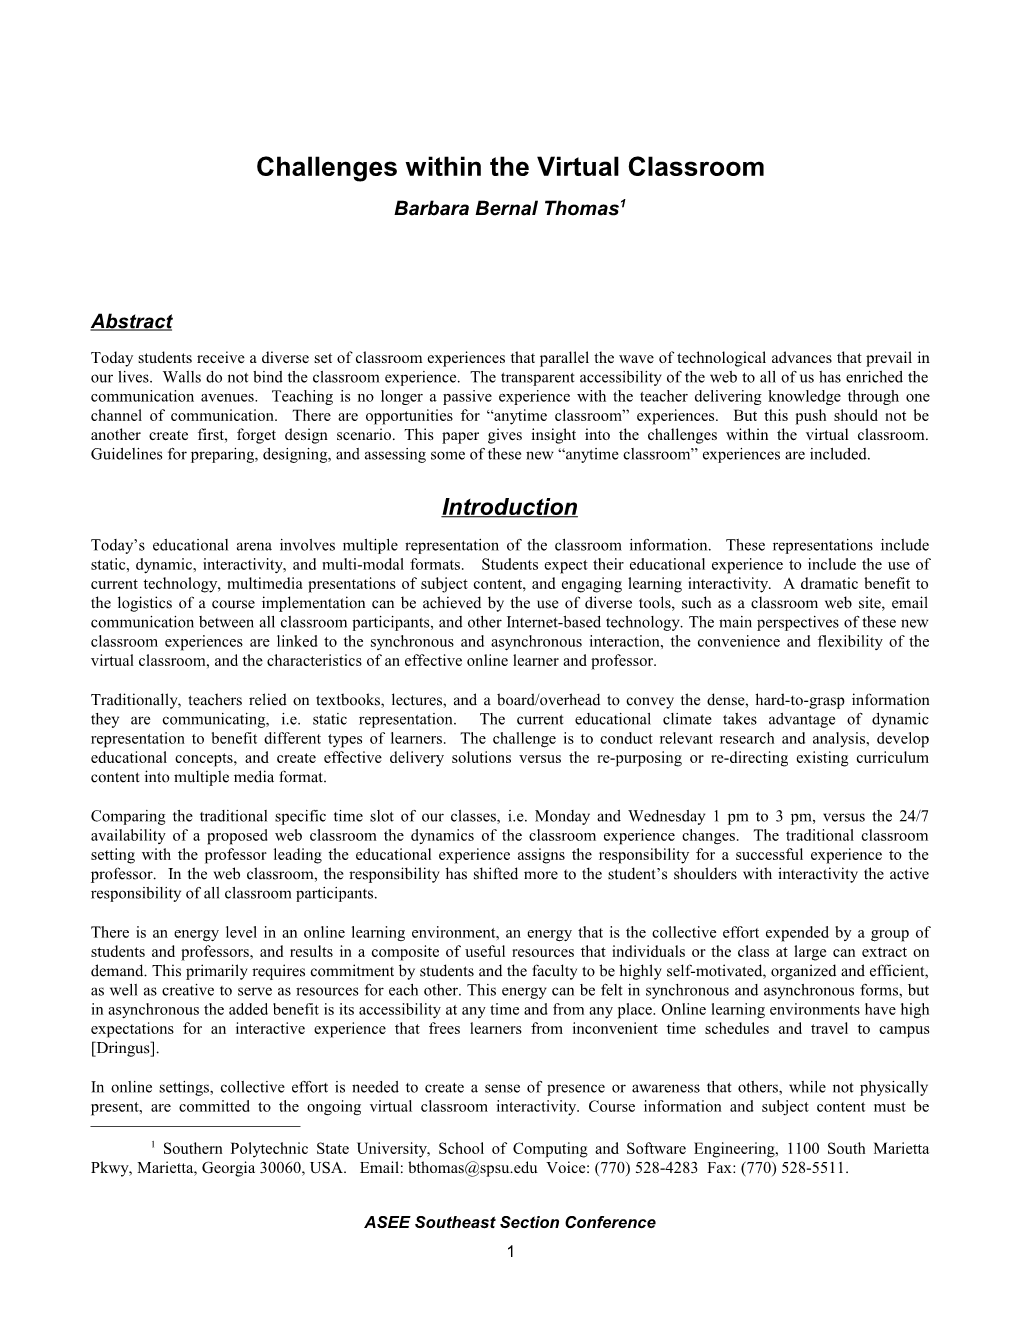 Challenges Within the Virtual Classroom in Software Engineering